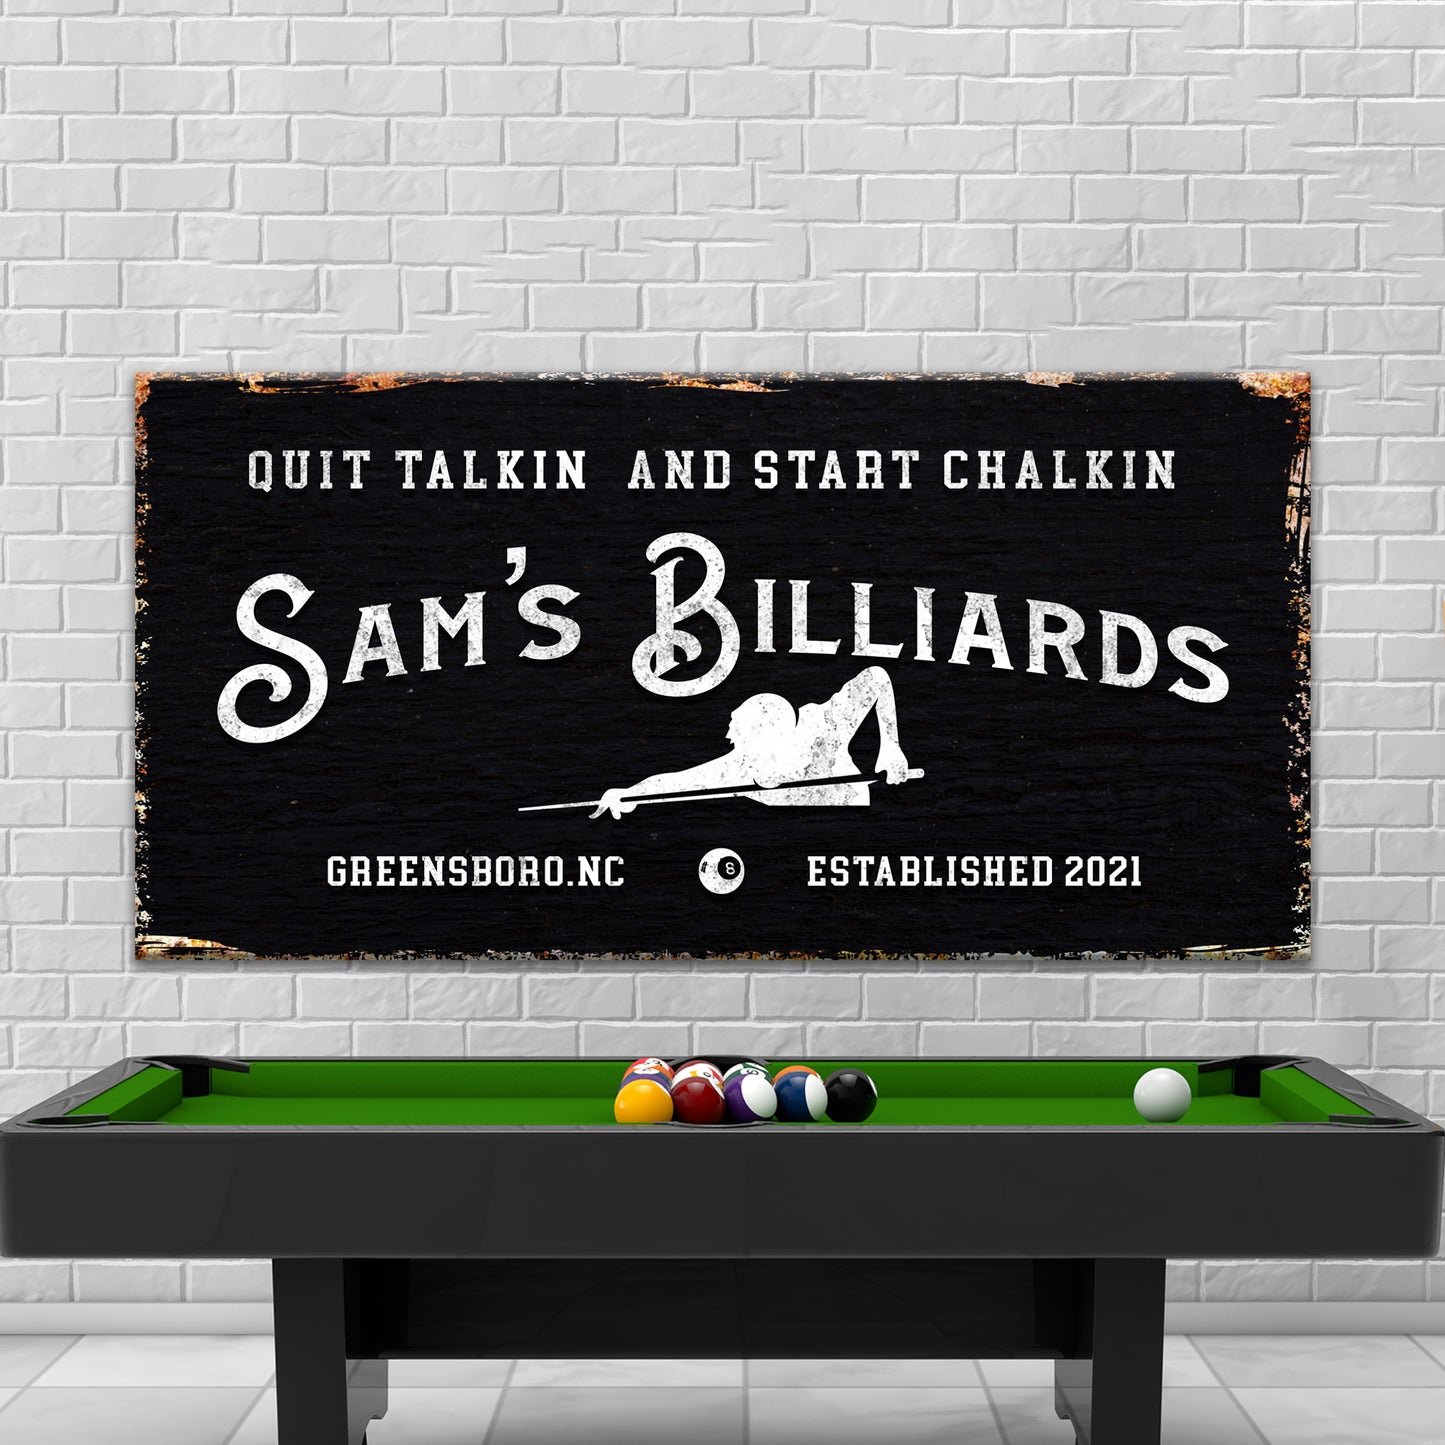 Billiards Room Sign - Image by Tailored Canvases